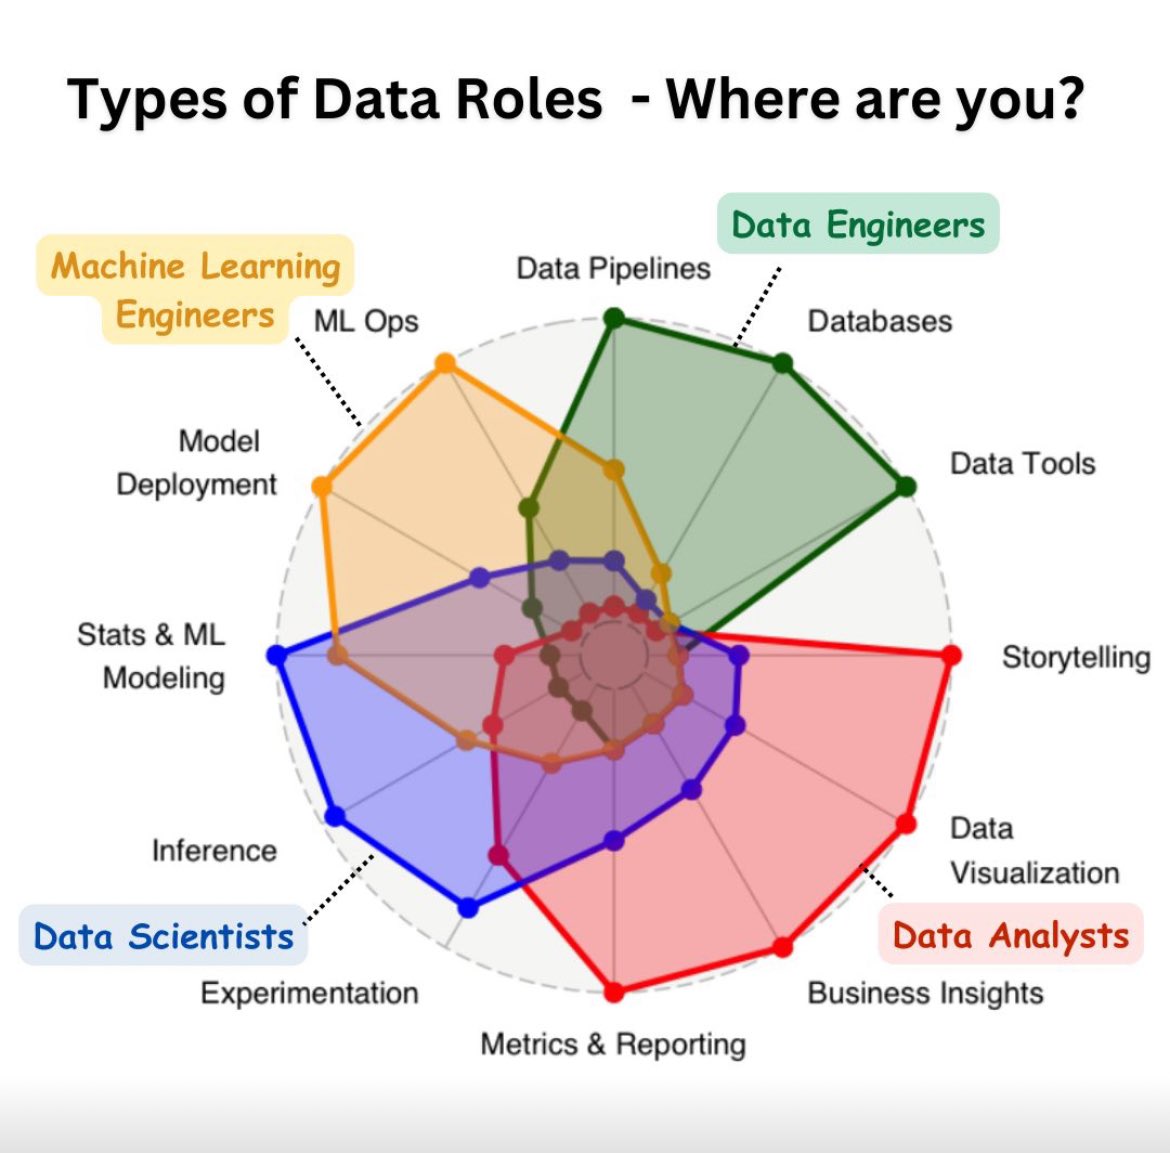 Types of Data Roles